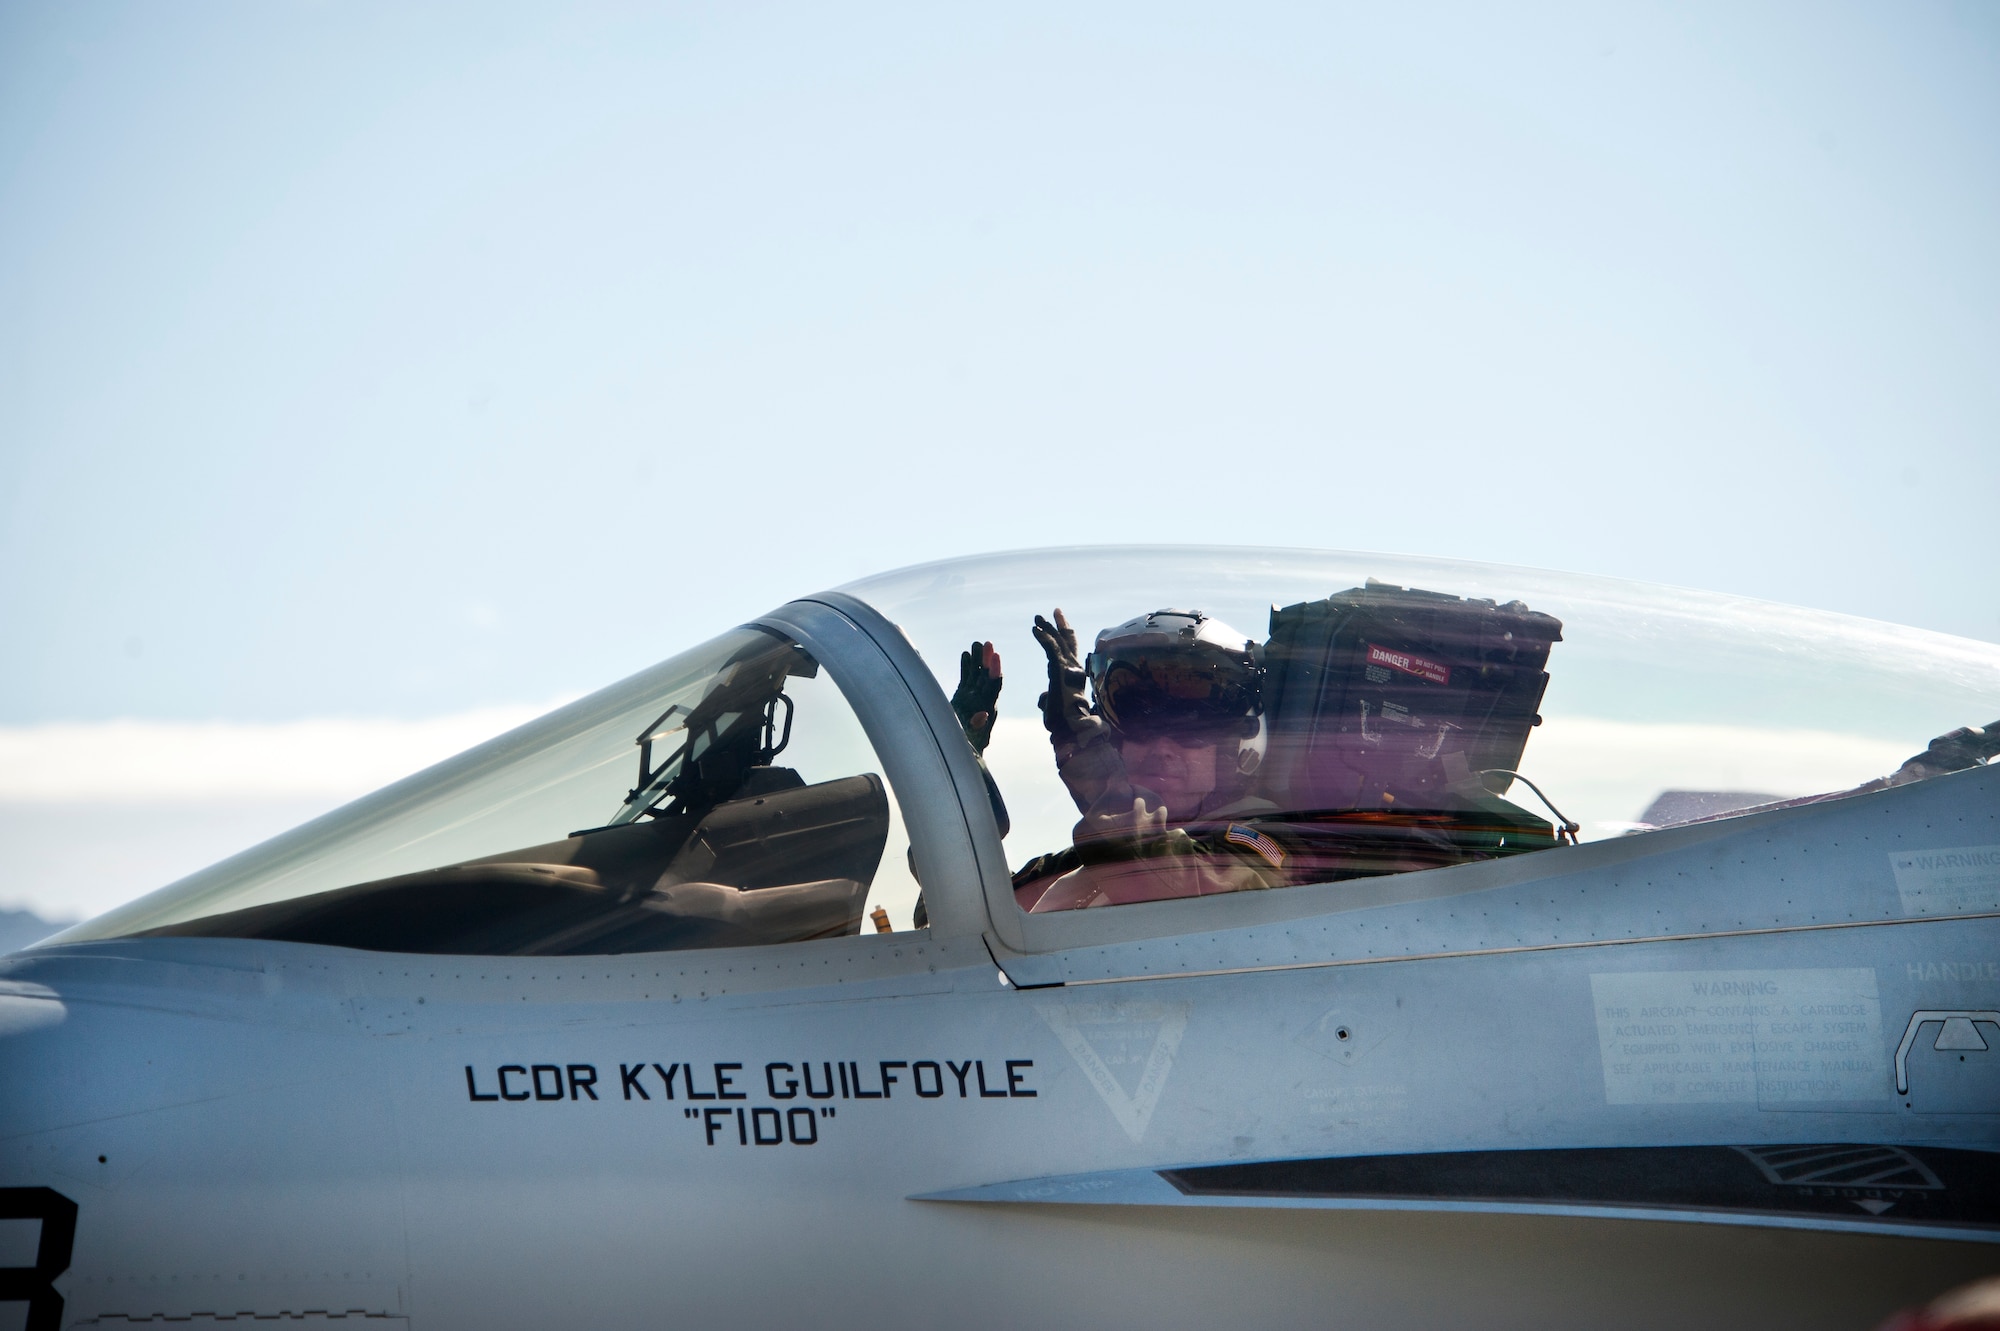 A U.S. Navy F/A-18E Hornet pilot assigned to the Strike Fighter Squadron 25 (VFA-25), Naval Air Station, Lemoore, Calif., signals "all hands off" to a plane captain, during Red Flag 13-2, on the Nellis Air Force Base, Nev. flight line Jan. 25, 2013. The all hands off signal indications aircraft maintenance personnel have control of the aircraft to perform pre-flight operational checks.  (U.S. Air Force photo by Lawrence Crespo)